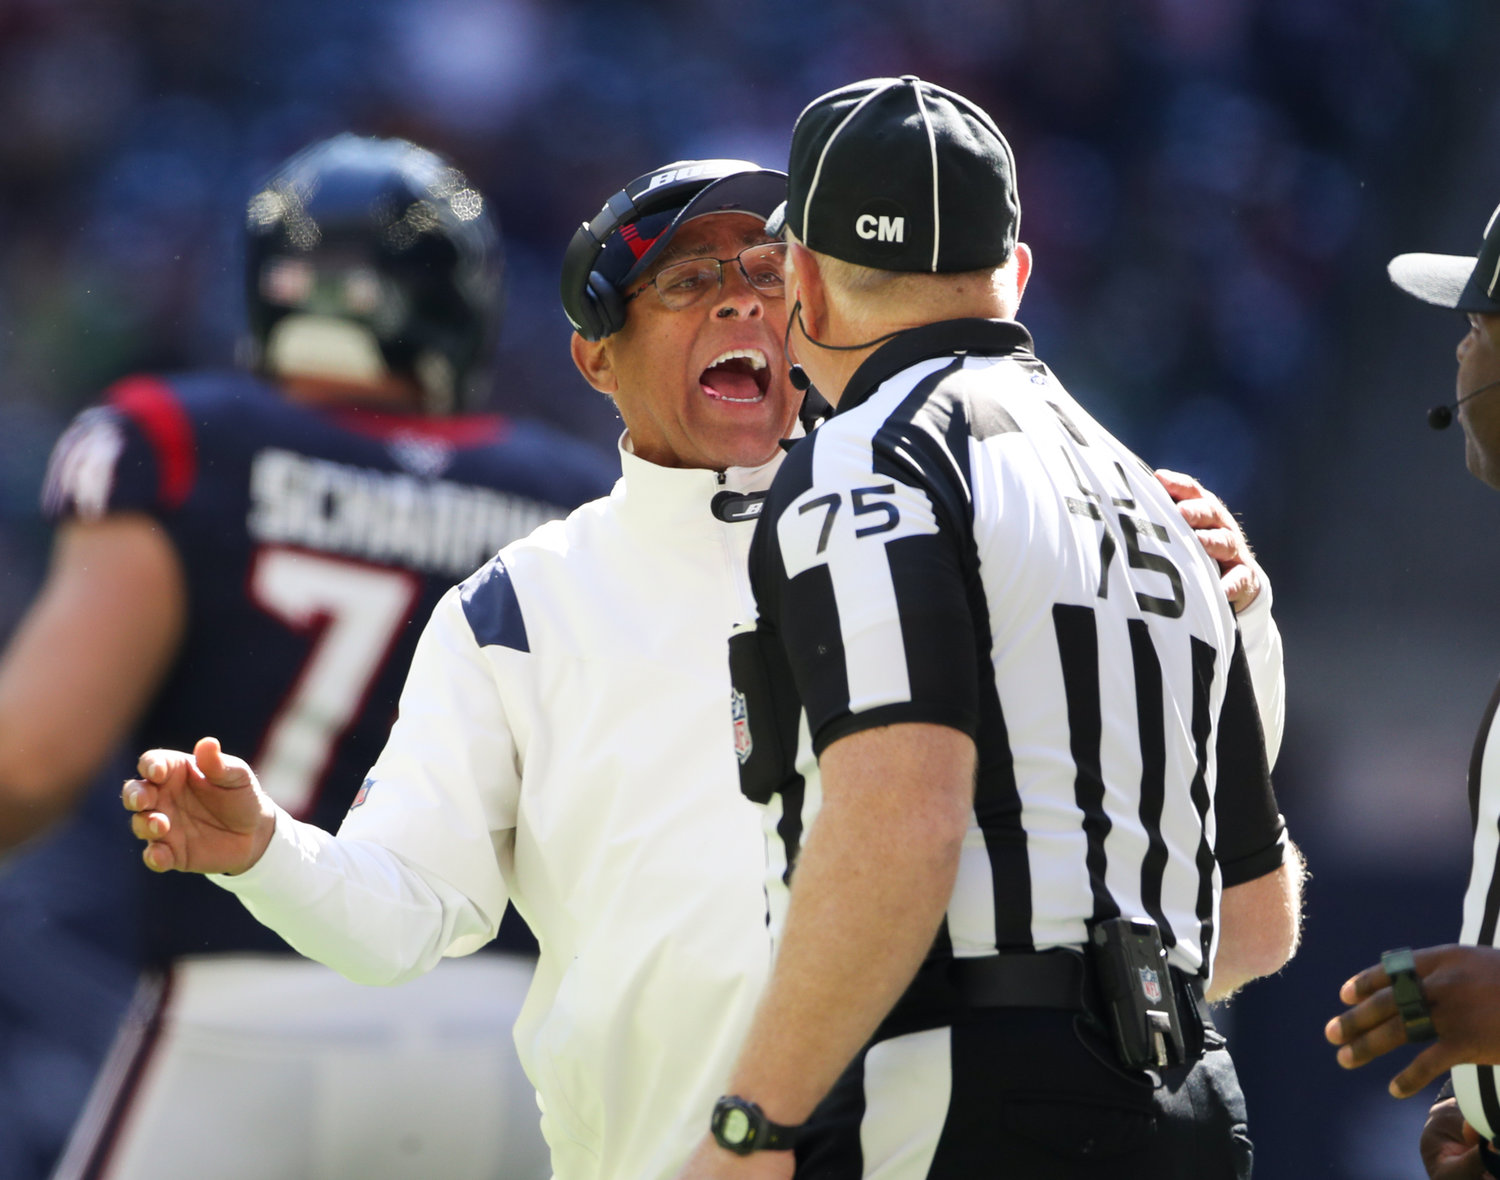 Houston Texans head coach David Culley talks with line judge Mark Stewart (75) after offensive pass interference is called against the Texans during the first half of an NFL game between the Seahawks and the Texans on December 12, 2021 in Houston, Texas.